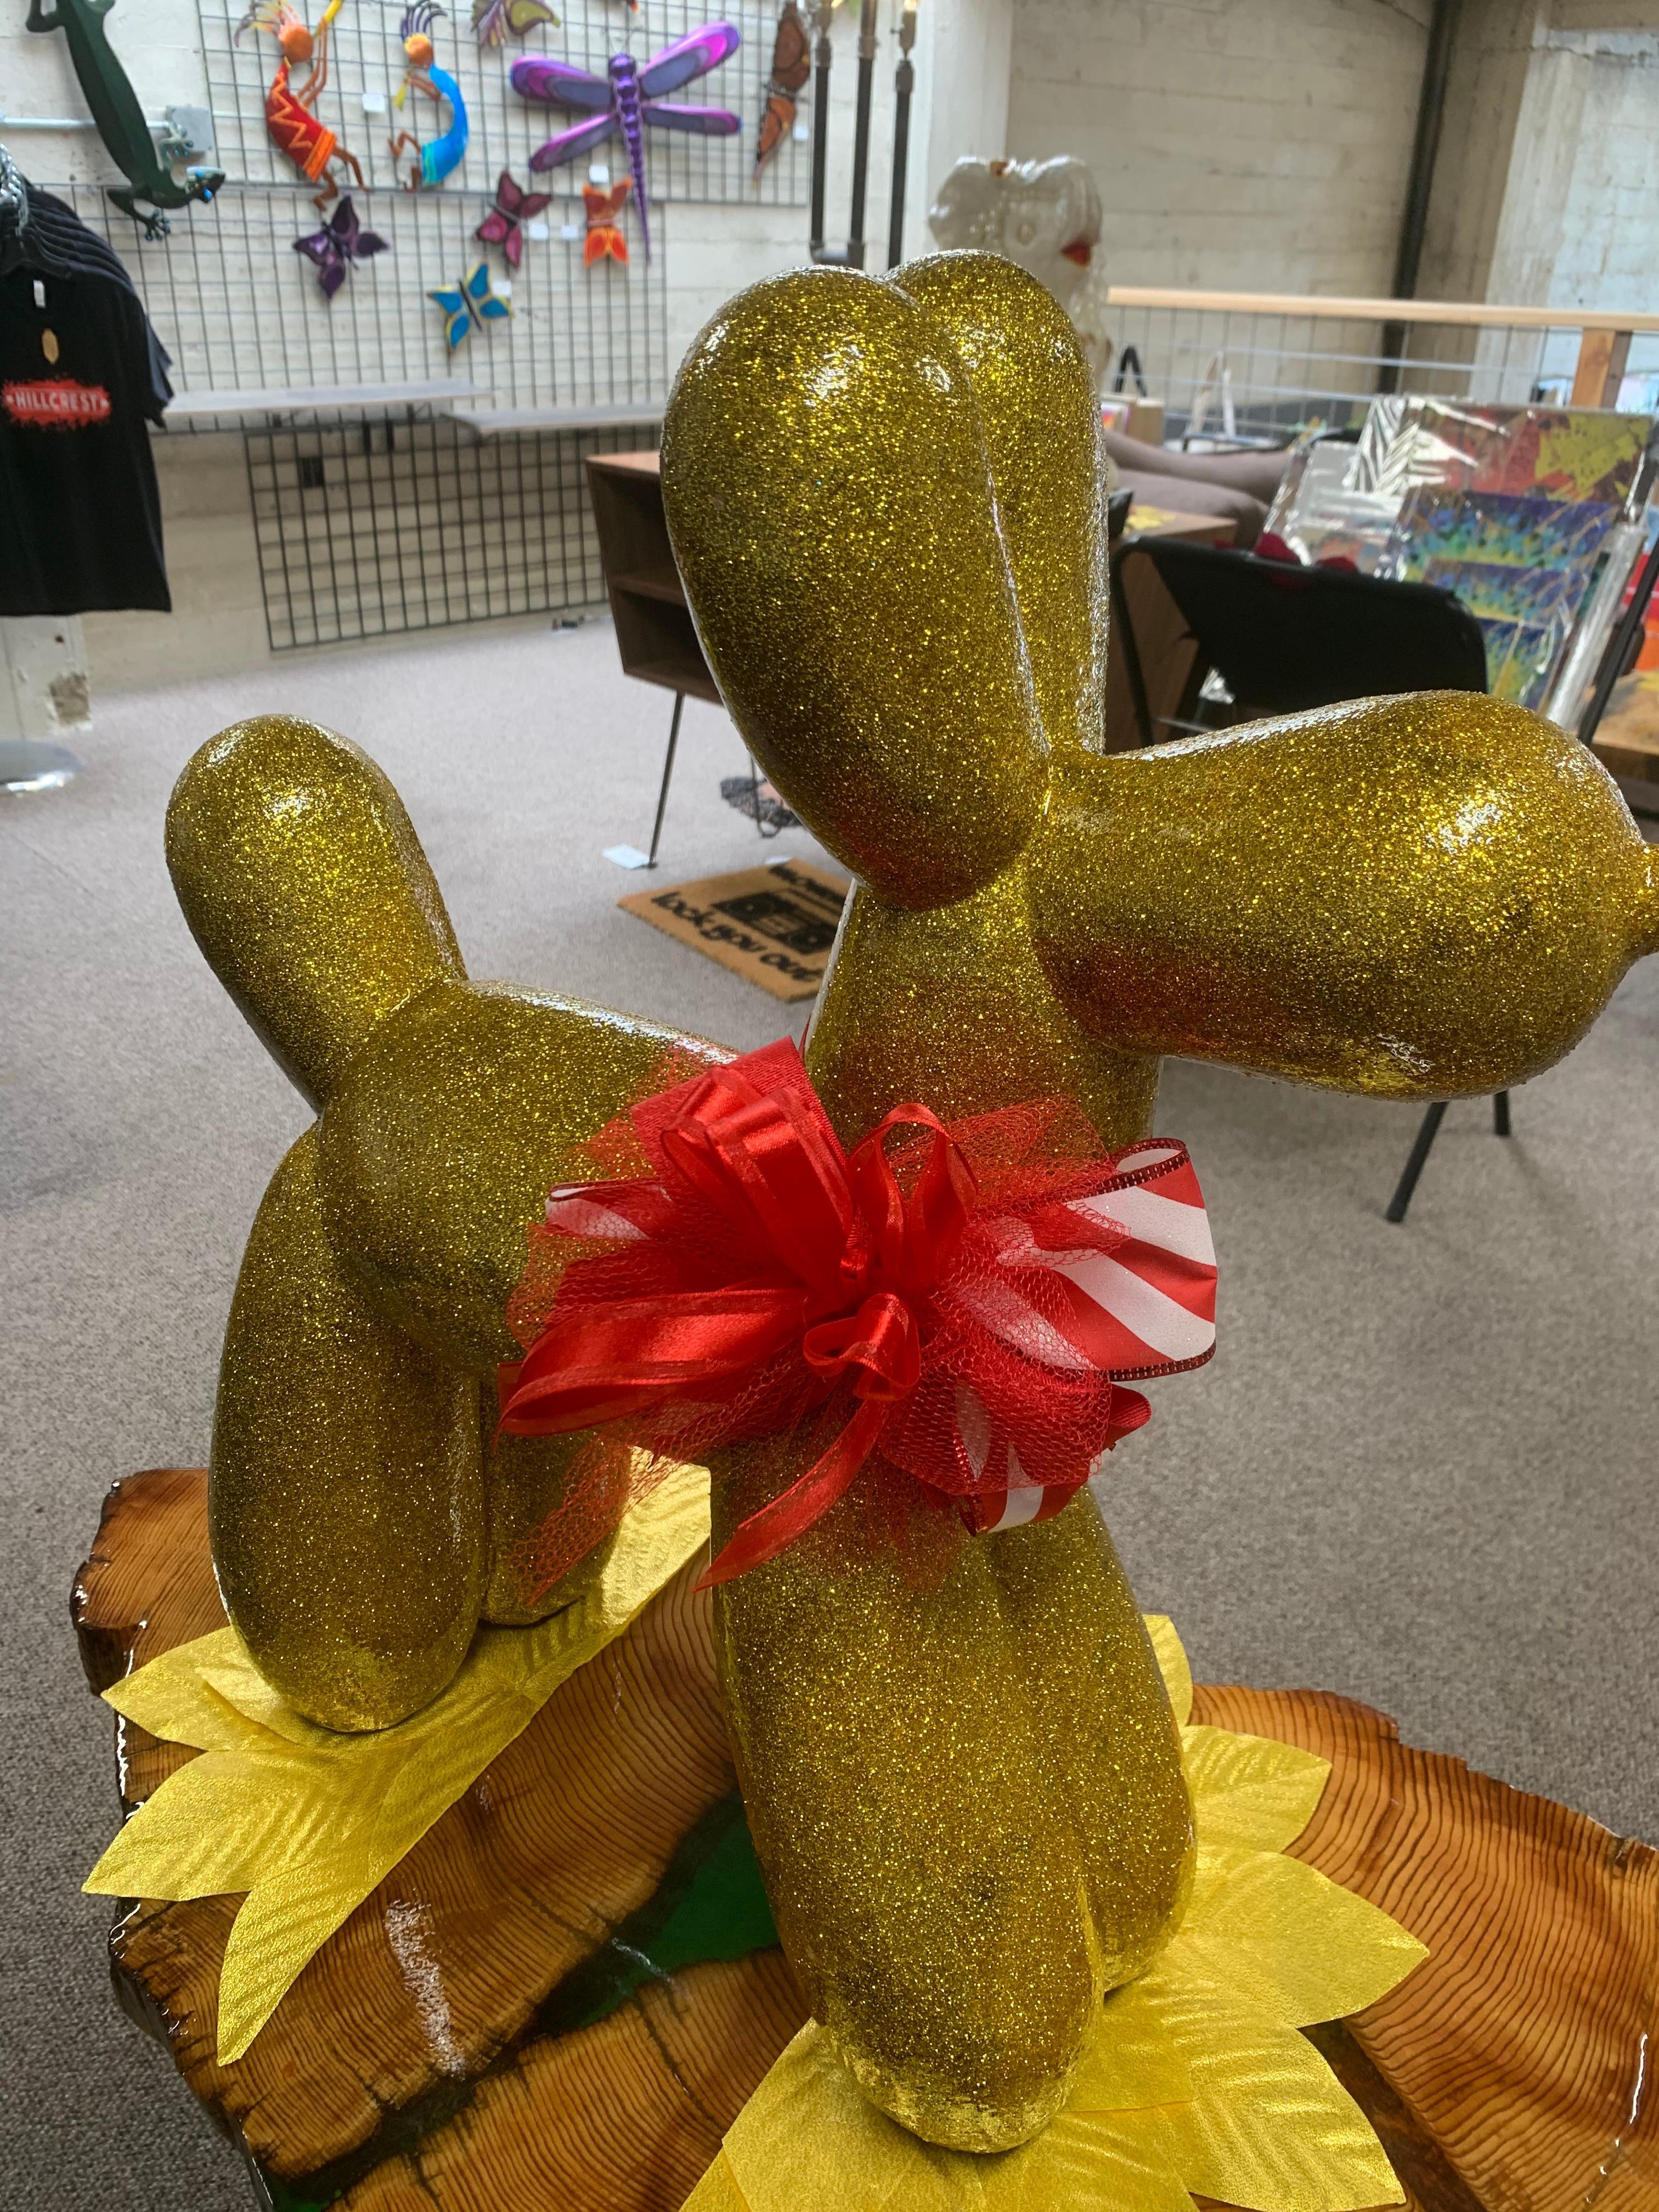 Limited Time Sale!!!!

Exclusive size, cast and materials. This is Oliveira's own version of the centenary worldwide known balloon dog. 

That famous artist didn't invented nothing or created anything new; he just made it famous>>

>>**Furthermore,